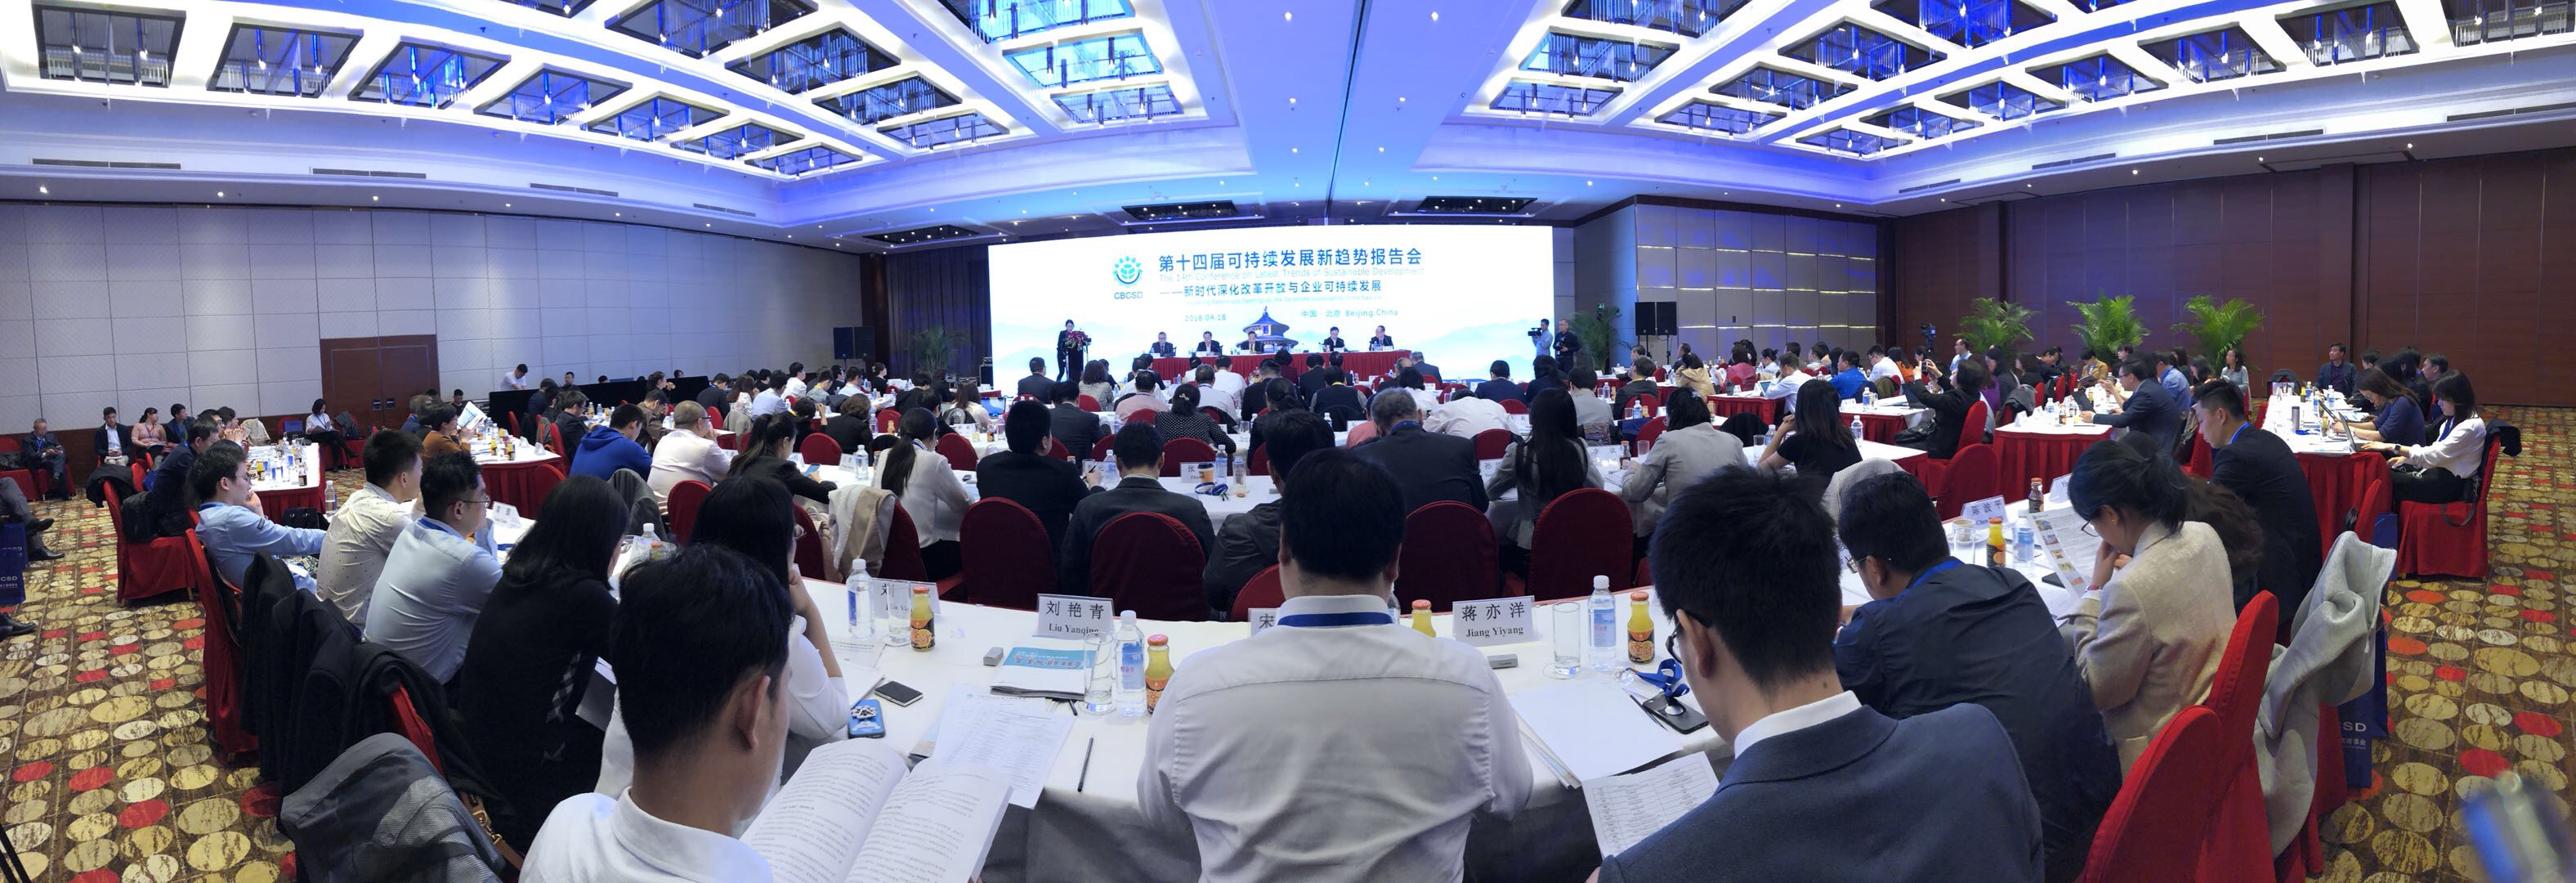 The 14th Conference on the Latest Trends of Sustainable Development was held in Beijing on April 18, 2018. [Photo courtesy of CBCSD]